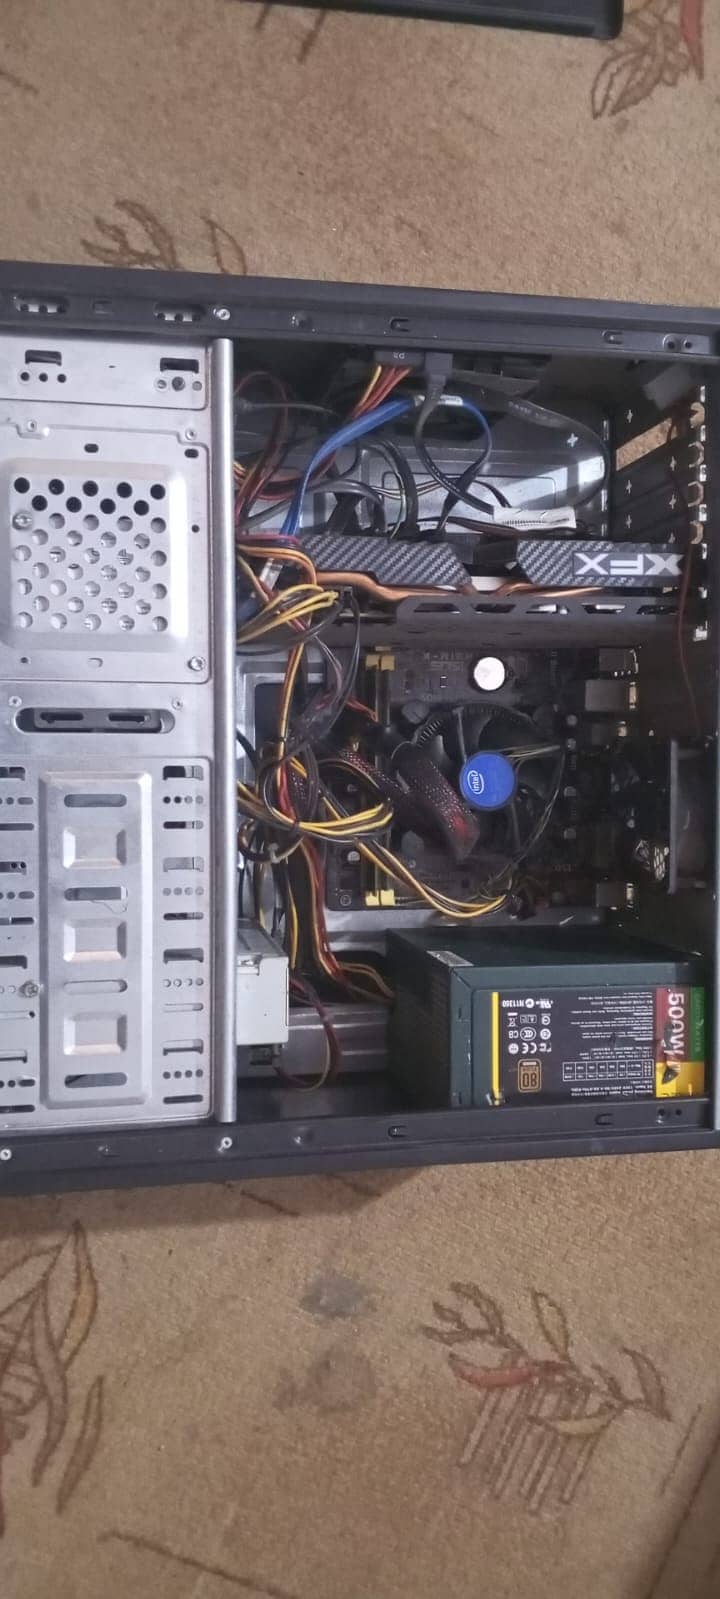 Core I7 4790 with Rx 590 8gb dual ssd 8